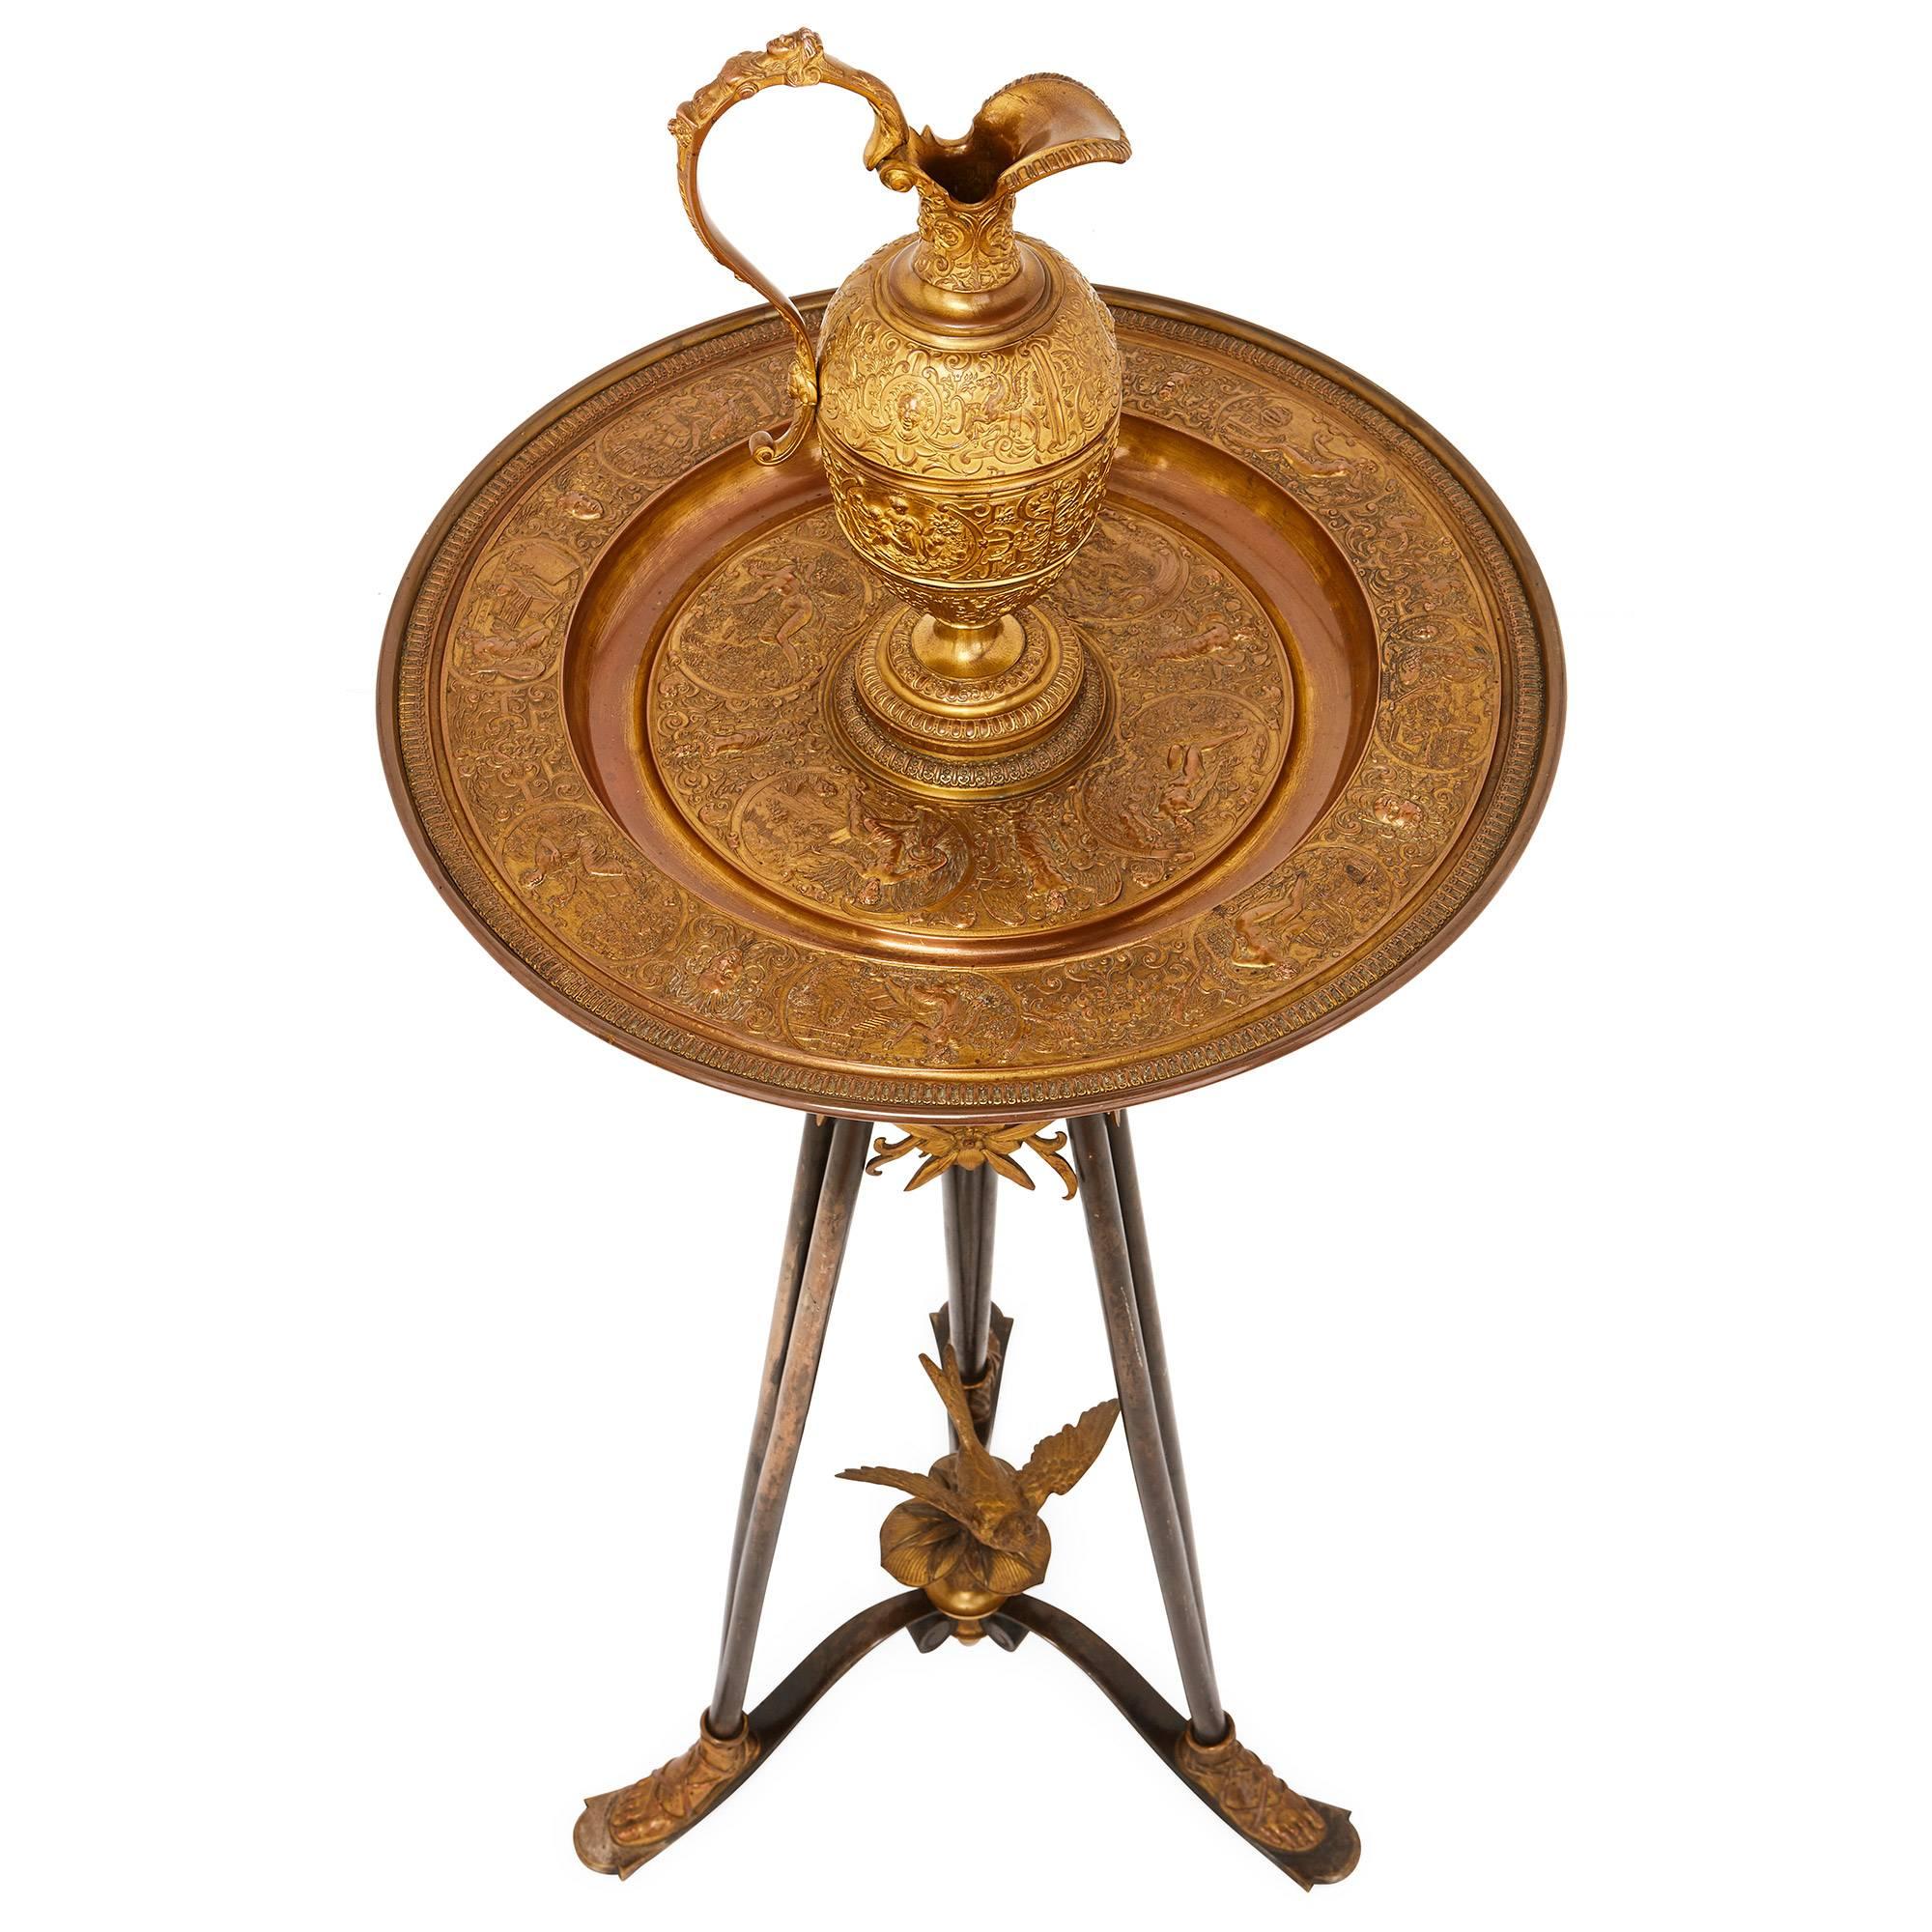 The exceptional bronze casting, in stunningly intricate detail, on this beautiful sculptural piece has been attributed to master metalworker Ferdinand Barbedienne. The piece takes the form of a bronze ewer on a large round basin platter and a tripod